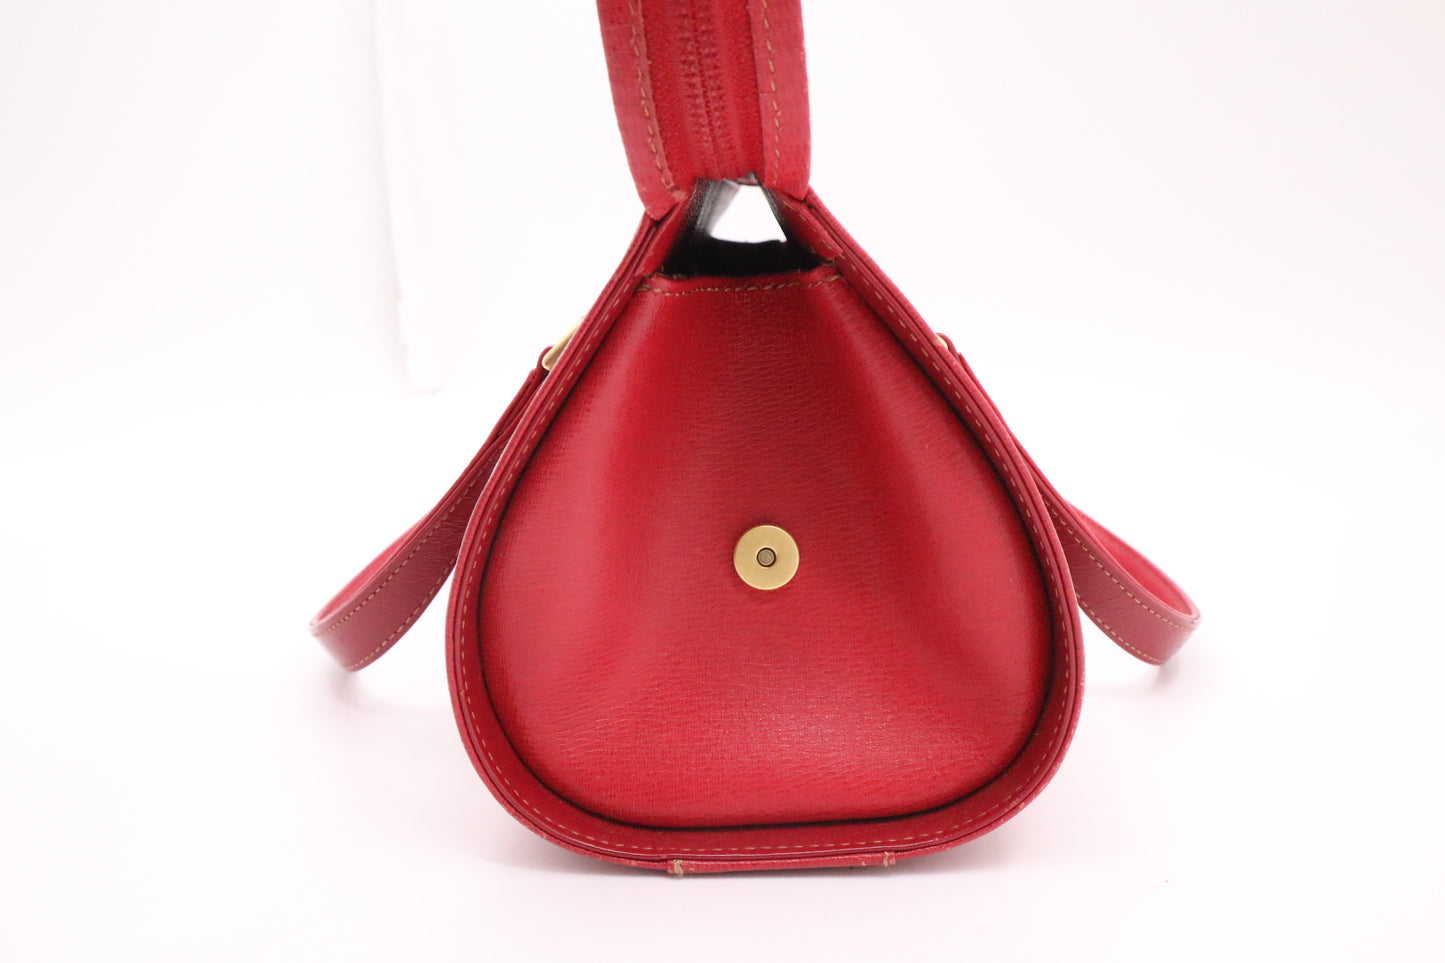 Burberry Round Handbag in Red Leather